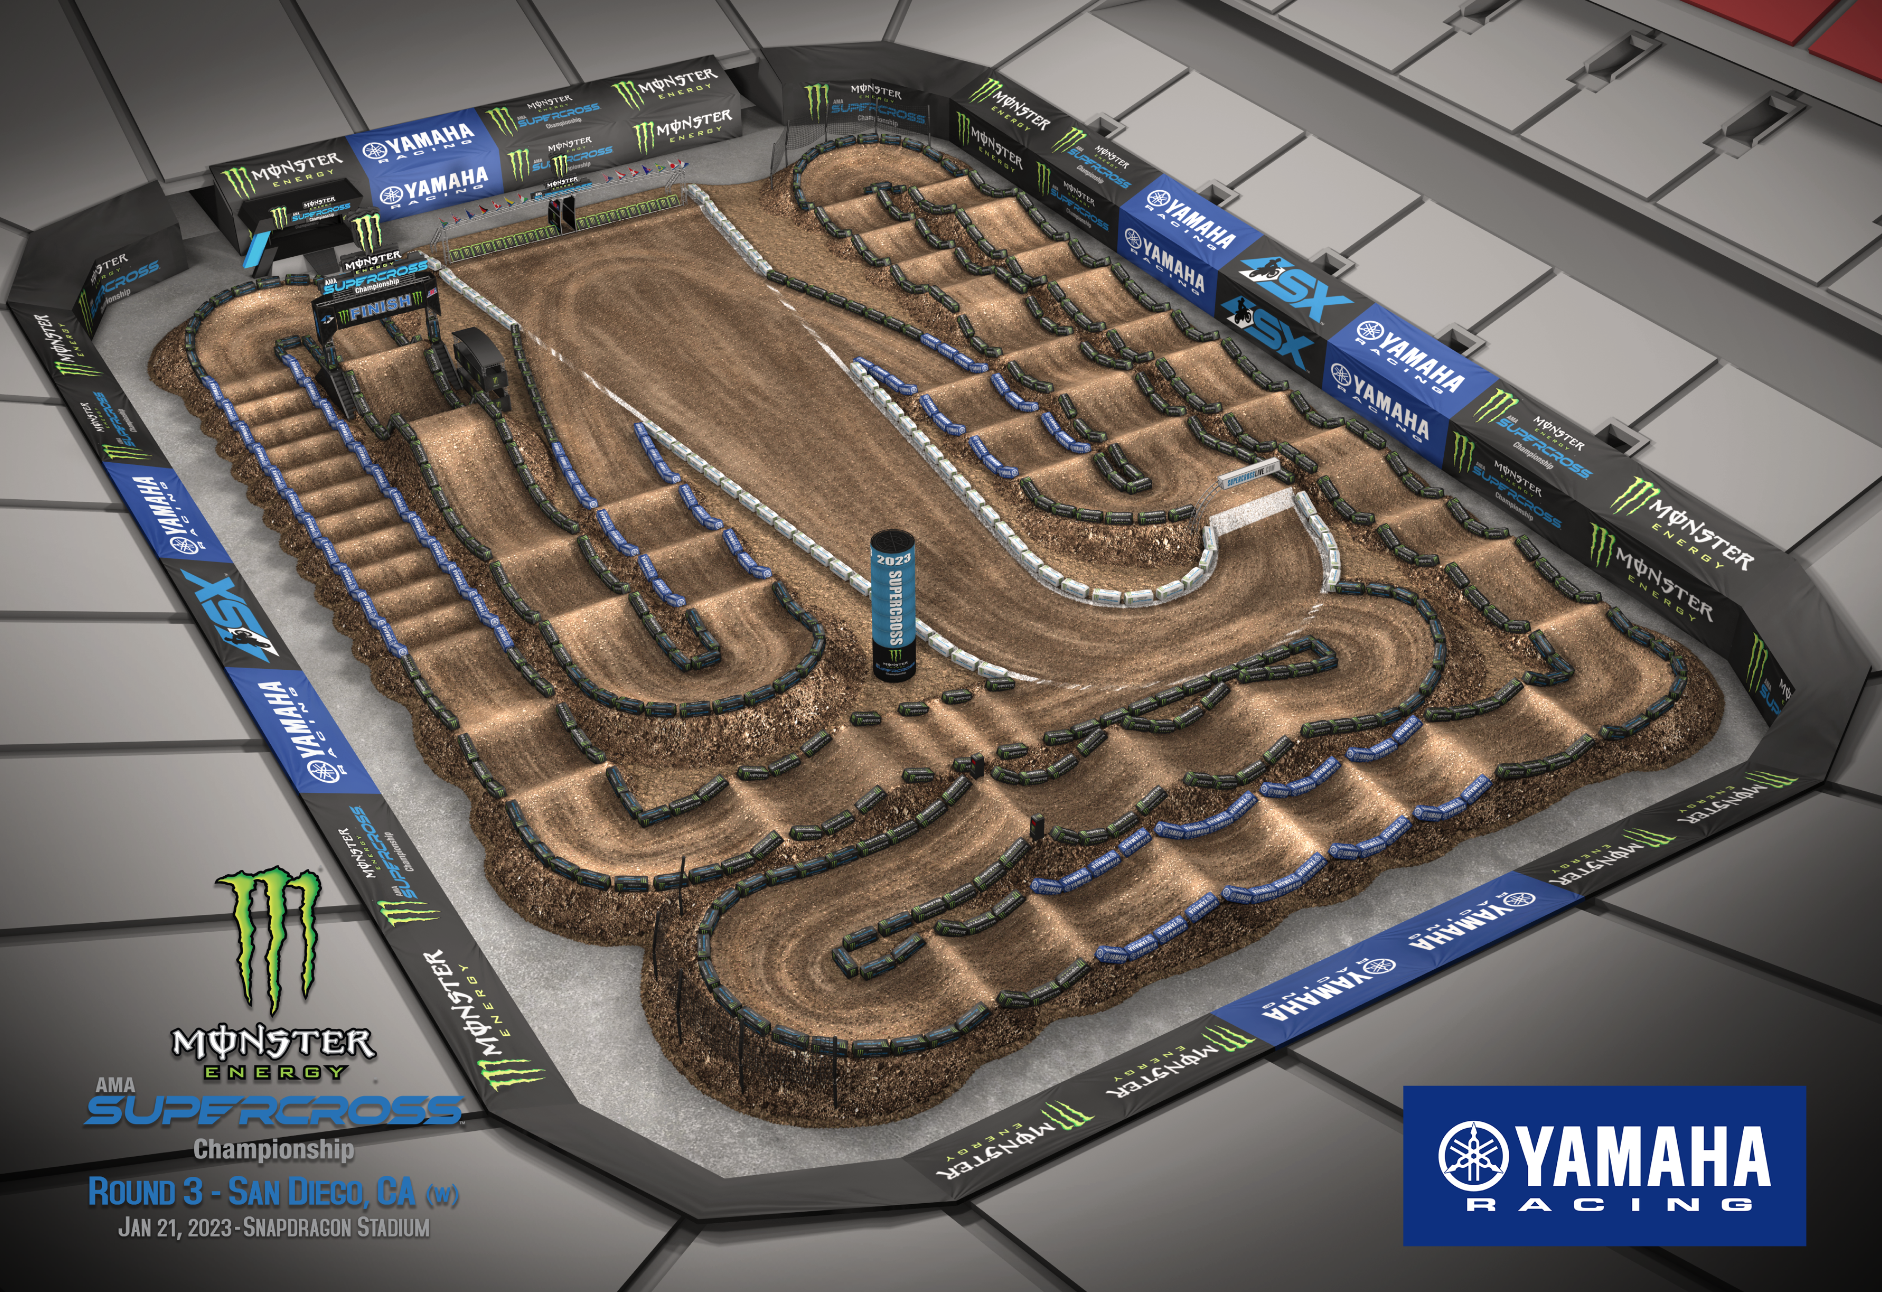 How to Watch/Stream 2023 San Diego Supercross on TV